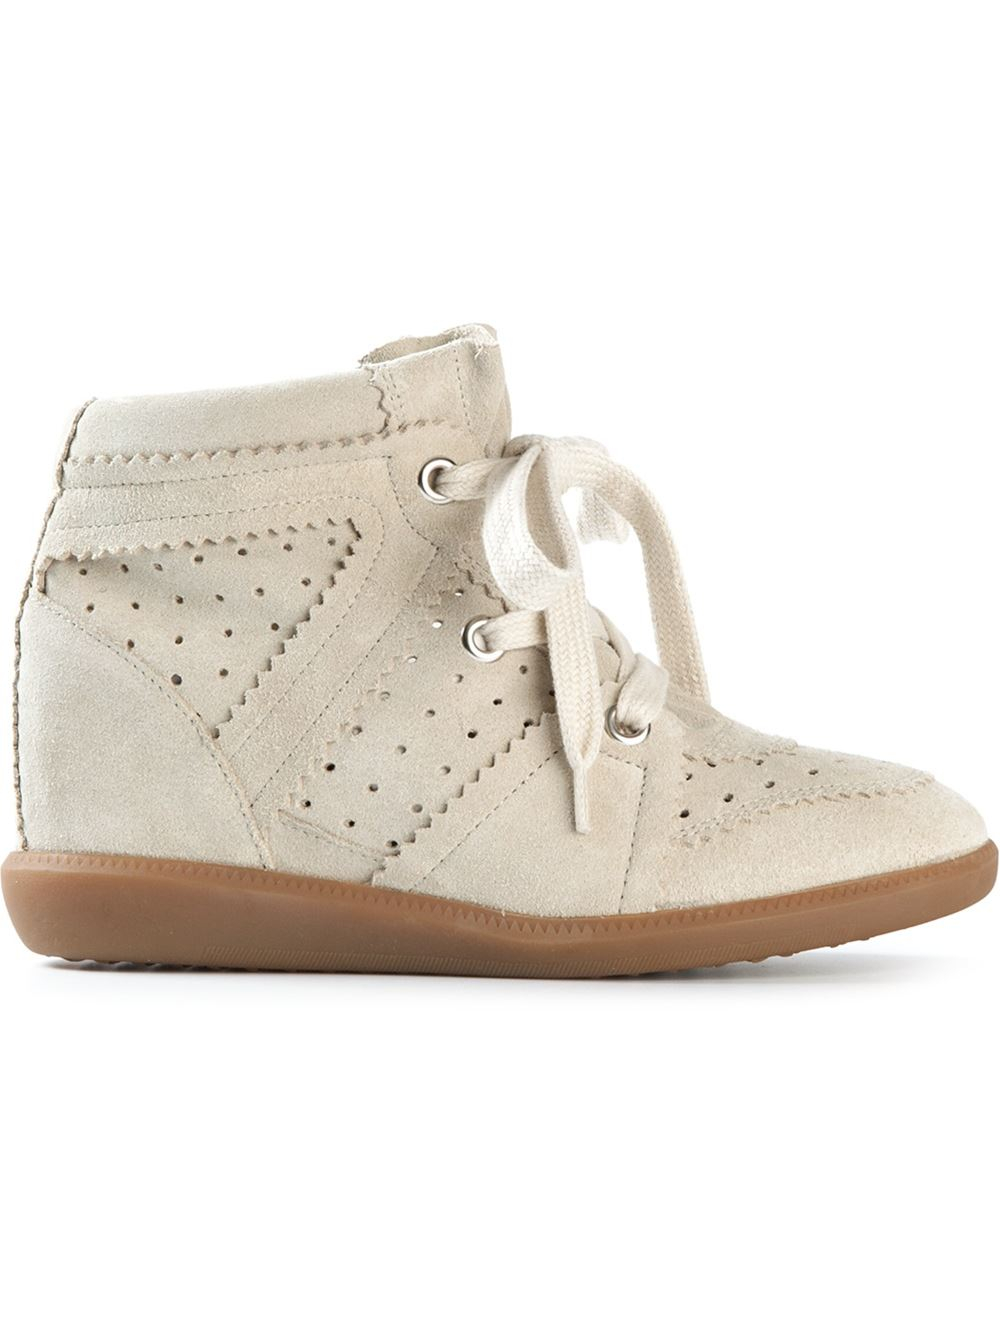 Isabel Marant Bobby Wedge Sneakers Shop Official, 43% OFF |  kmimmigration.com